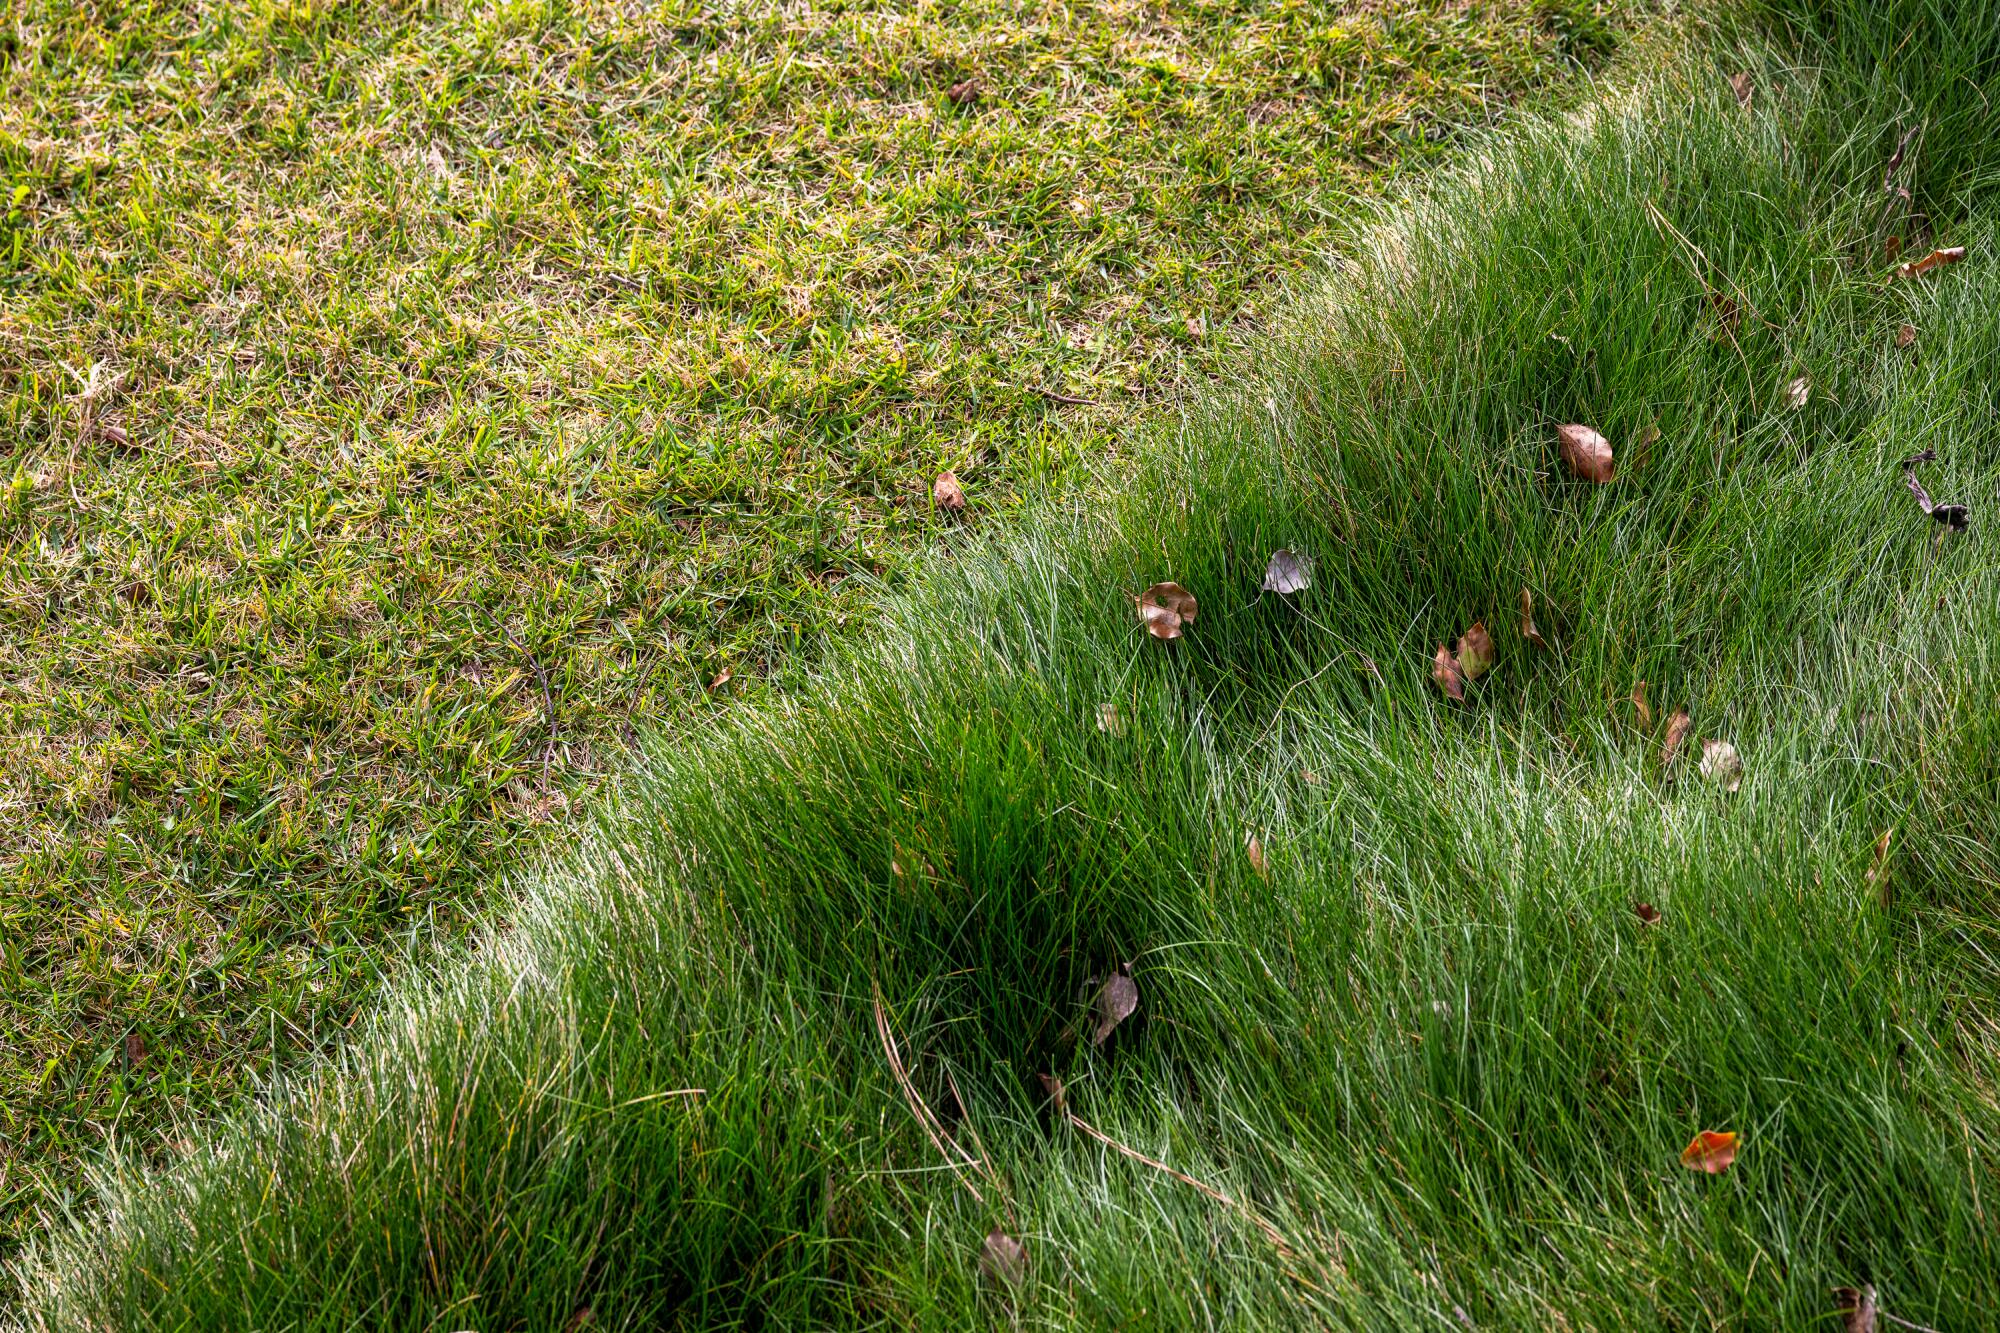 A diagonal line separating two different kinds of grasses, one short lawn and the other long native fescue grass.